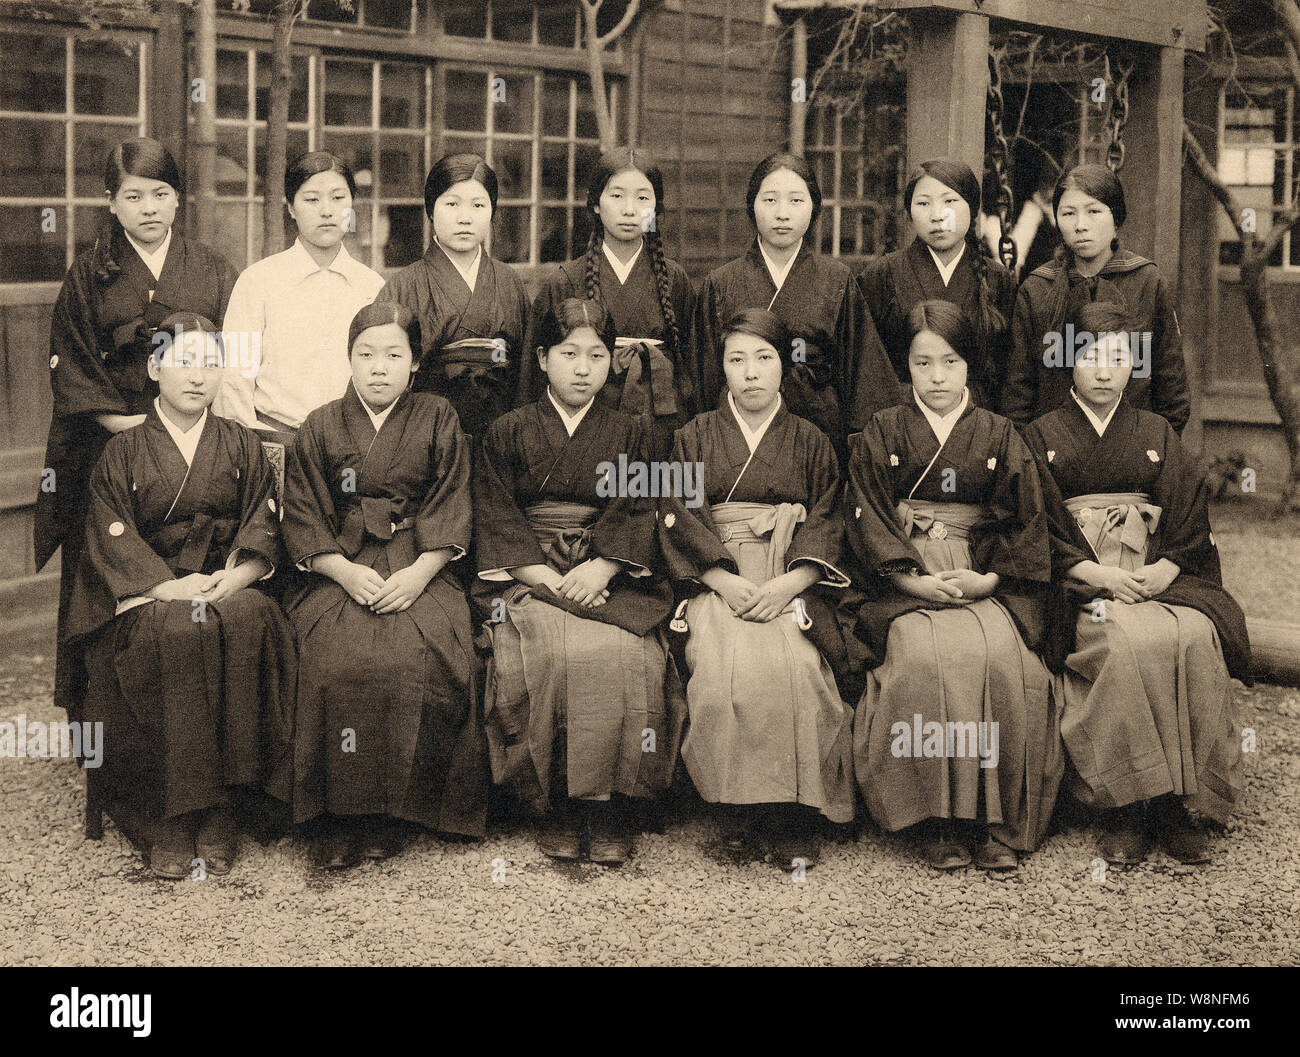 [ 1920s Japan - Japanese Girl’s High School ] —   Students of Miwada Girl’s High School (三輪田高等女學校) in Kudan-kita, Tokyo, 1928 (Showa 3). The school still exists and is now known as Miwada Gakuen (三輪田学園中学校).  The school was founded in Matsuyama, Shikoku, in 1880 (Meiji 13) by female educator Masako Miwada (1843-1927, 三輪田眞佐子), but moved to Tokyo in (1887 (Meiji 20). A scholar of the Chinese classics (漢学者), Miwada was among the first to promote education for girls.  20th century vintage gelatin silver print. Stock Photo